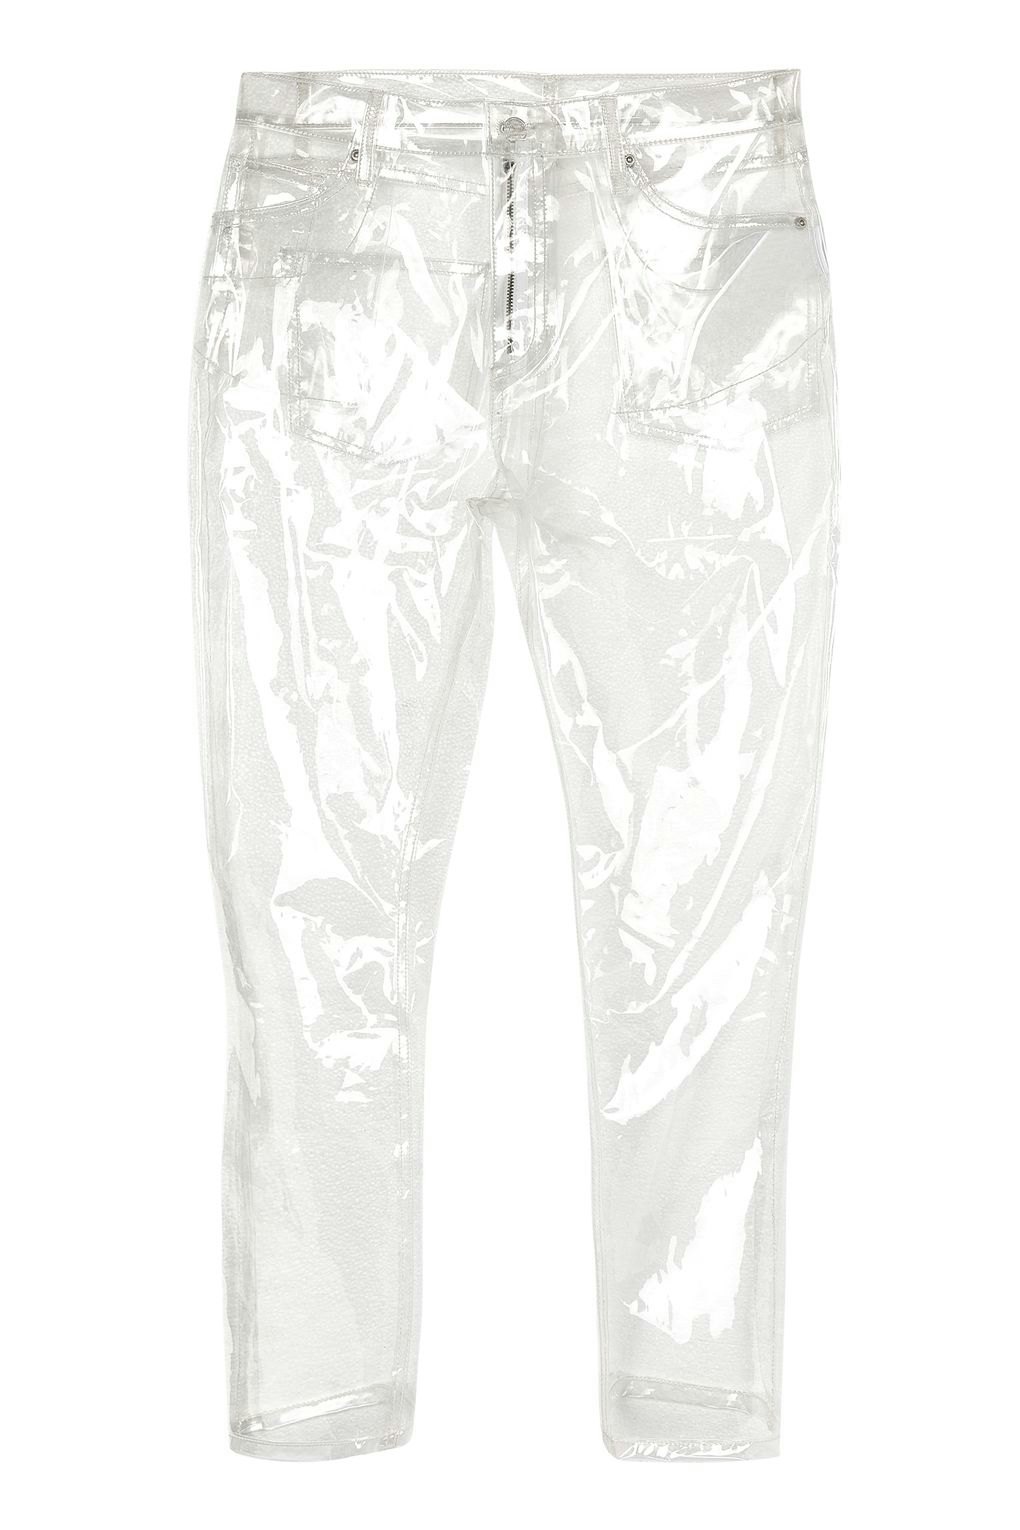 Clear Jeans  Topshops Selling SeeThrough Pants For 60 Would You Wear  Them  Hollywood Life